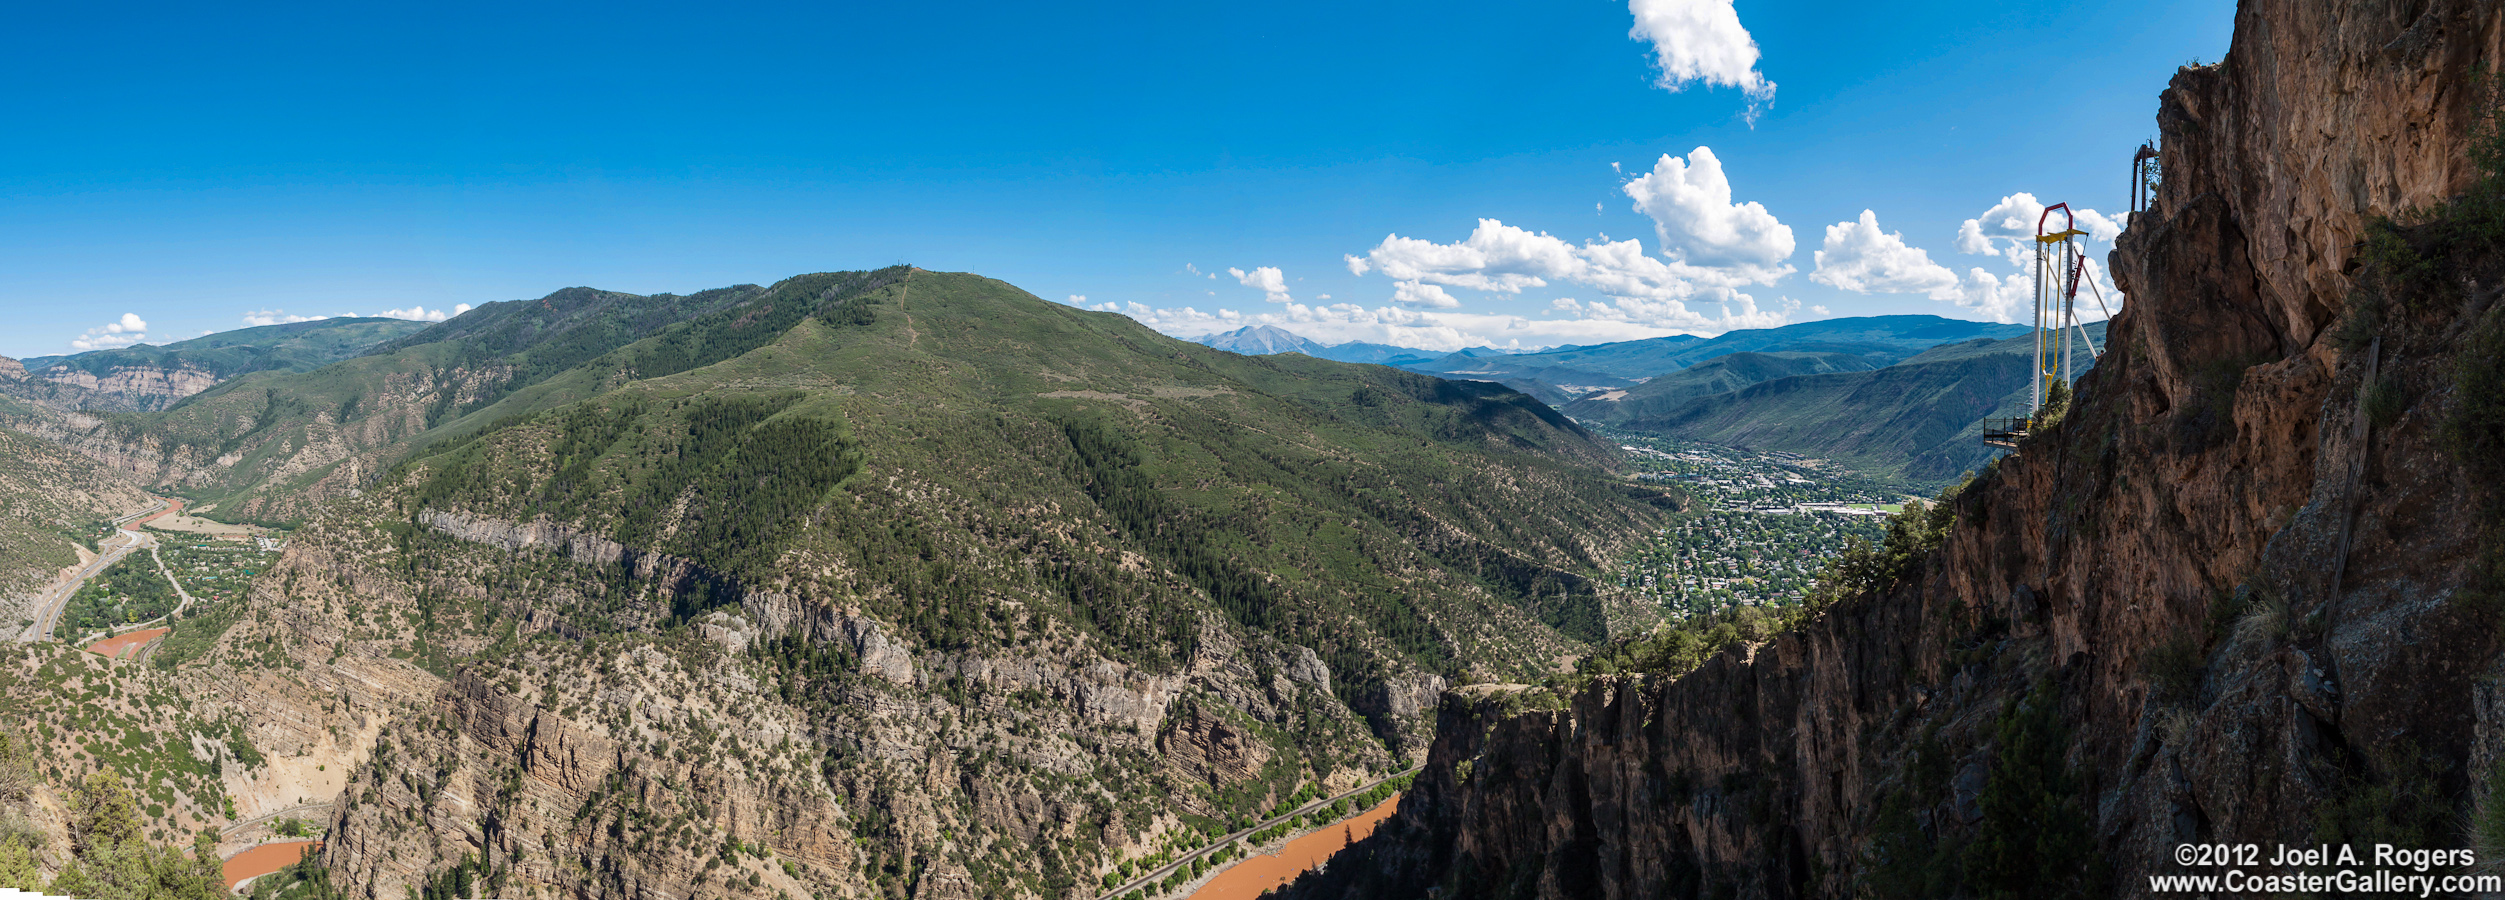 Panorama of Rocky Mountains and Giant Canyon Swing